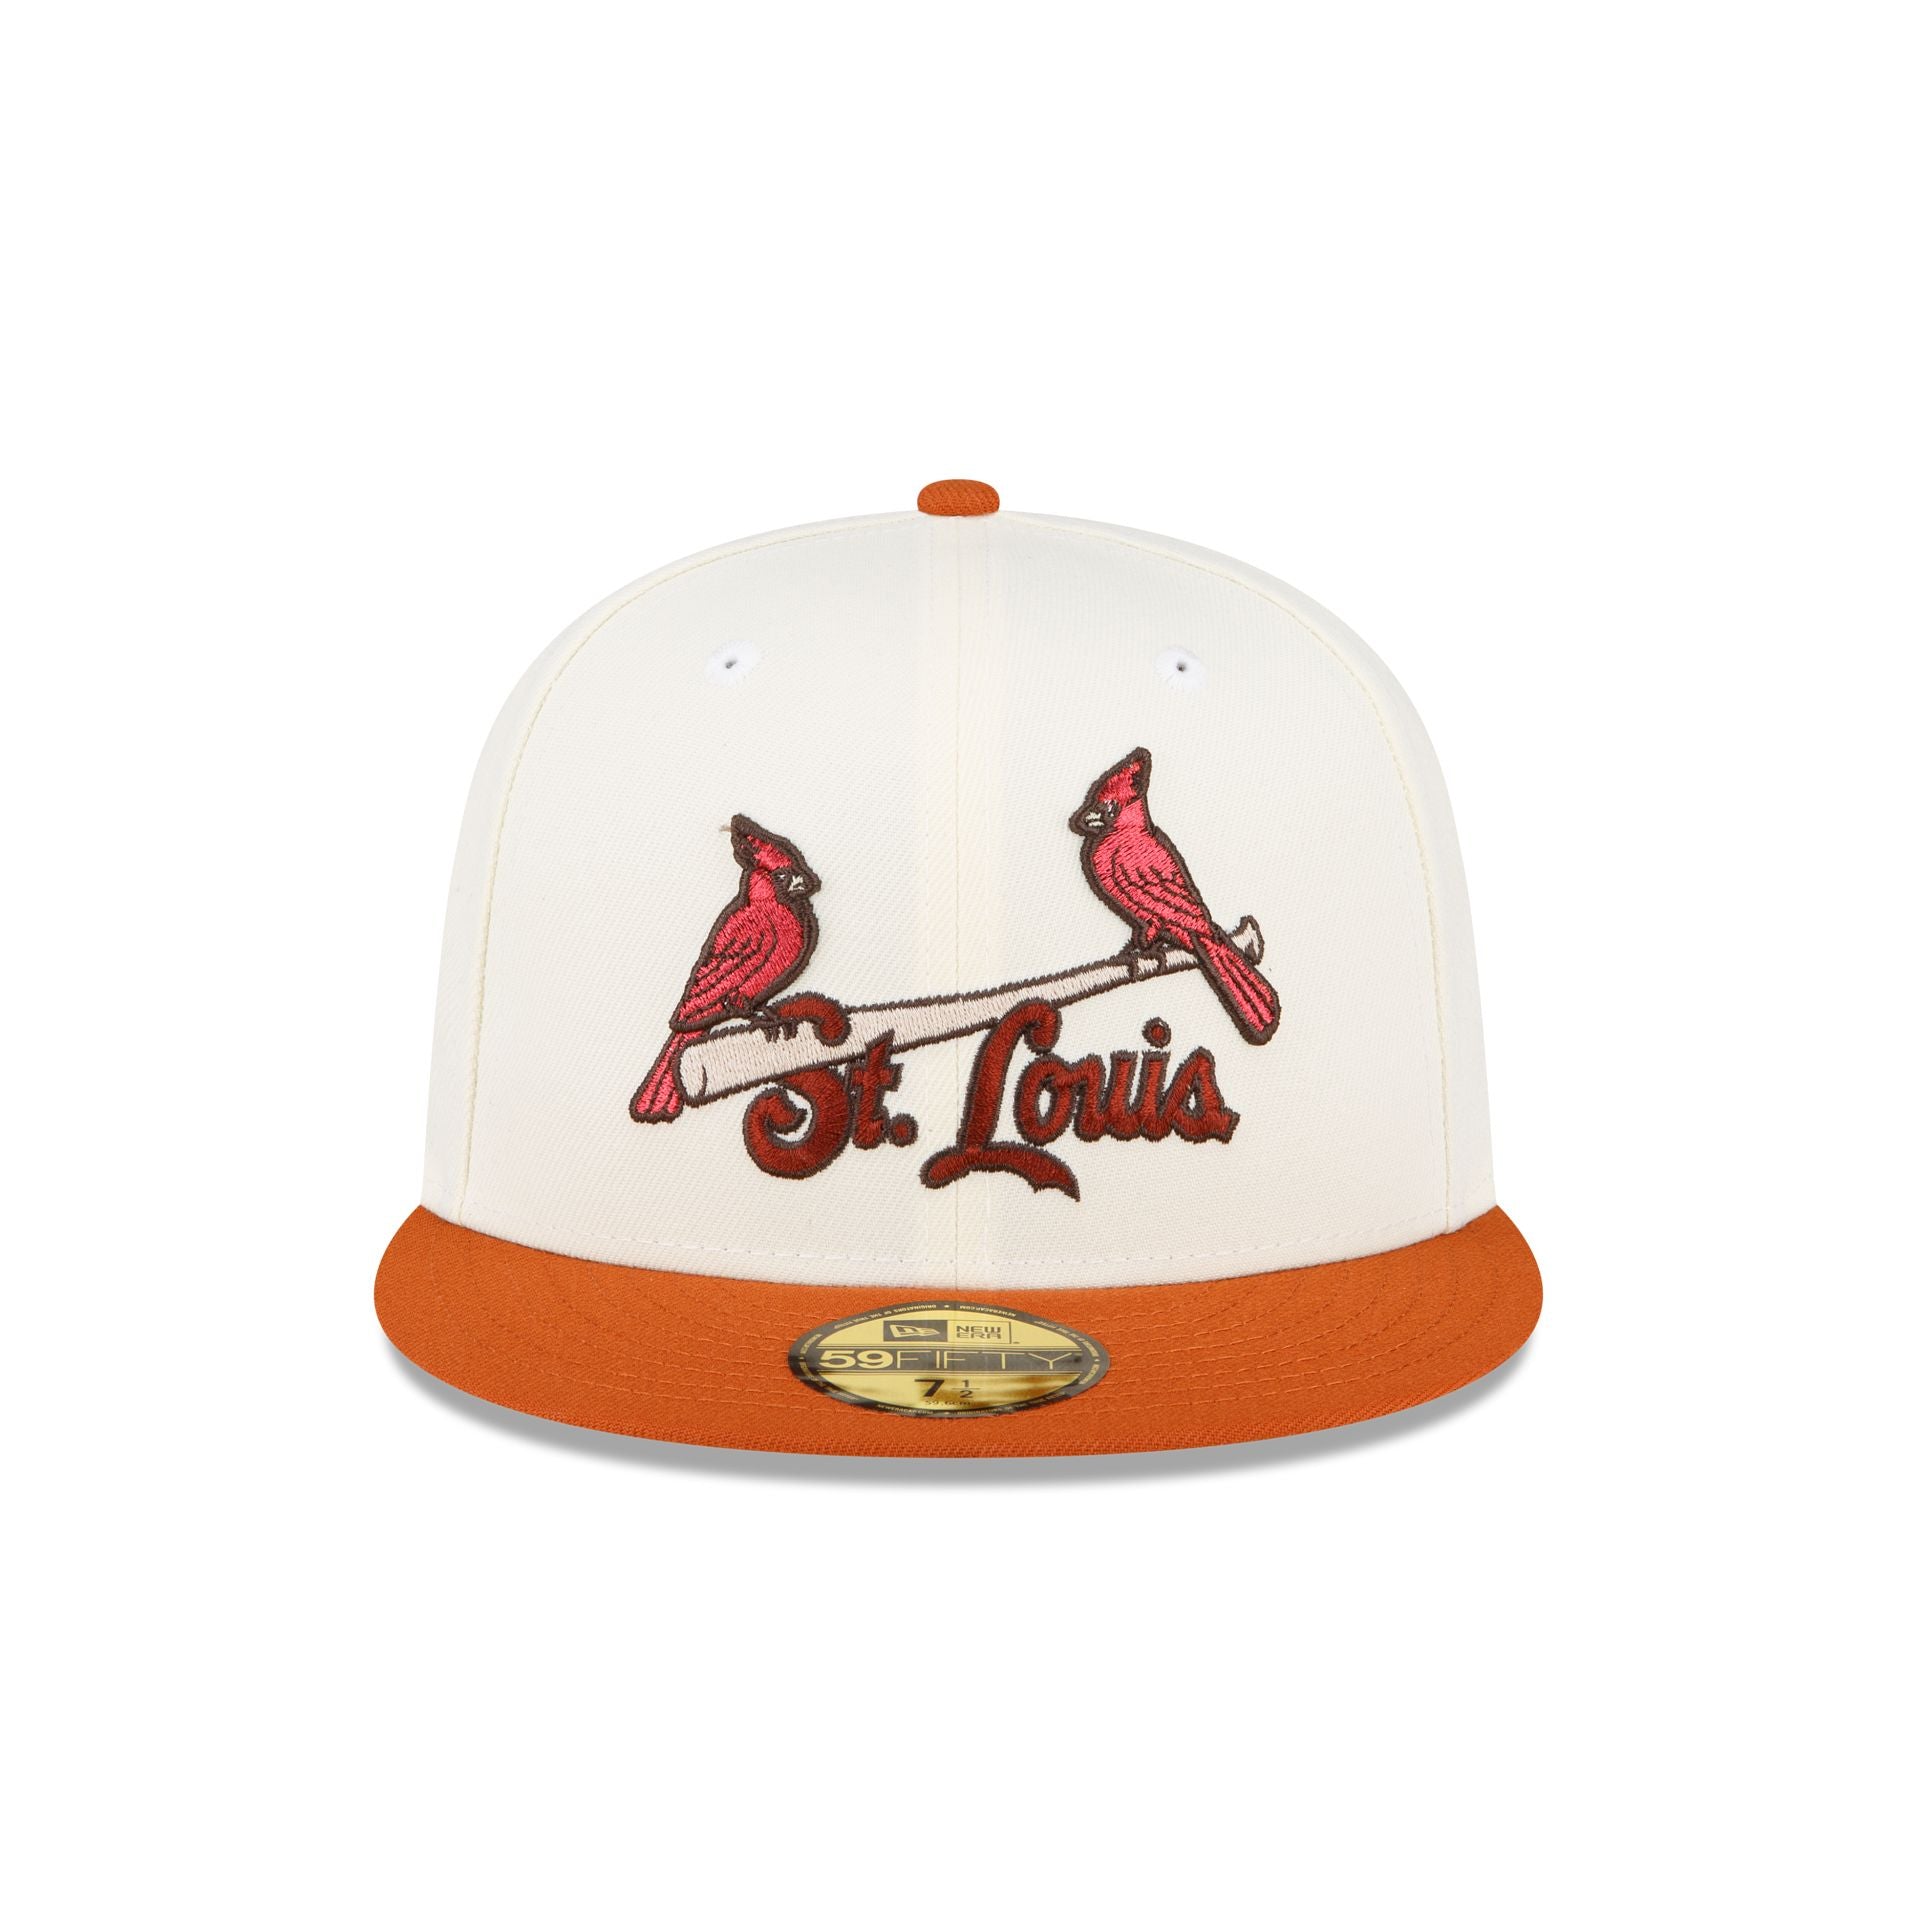 New Era St. Louis Cardinals World Series 1967 Black Throwback Edition  59Fifty Fitted Cap, EXCLUSIVE HATS, CAPS